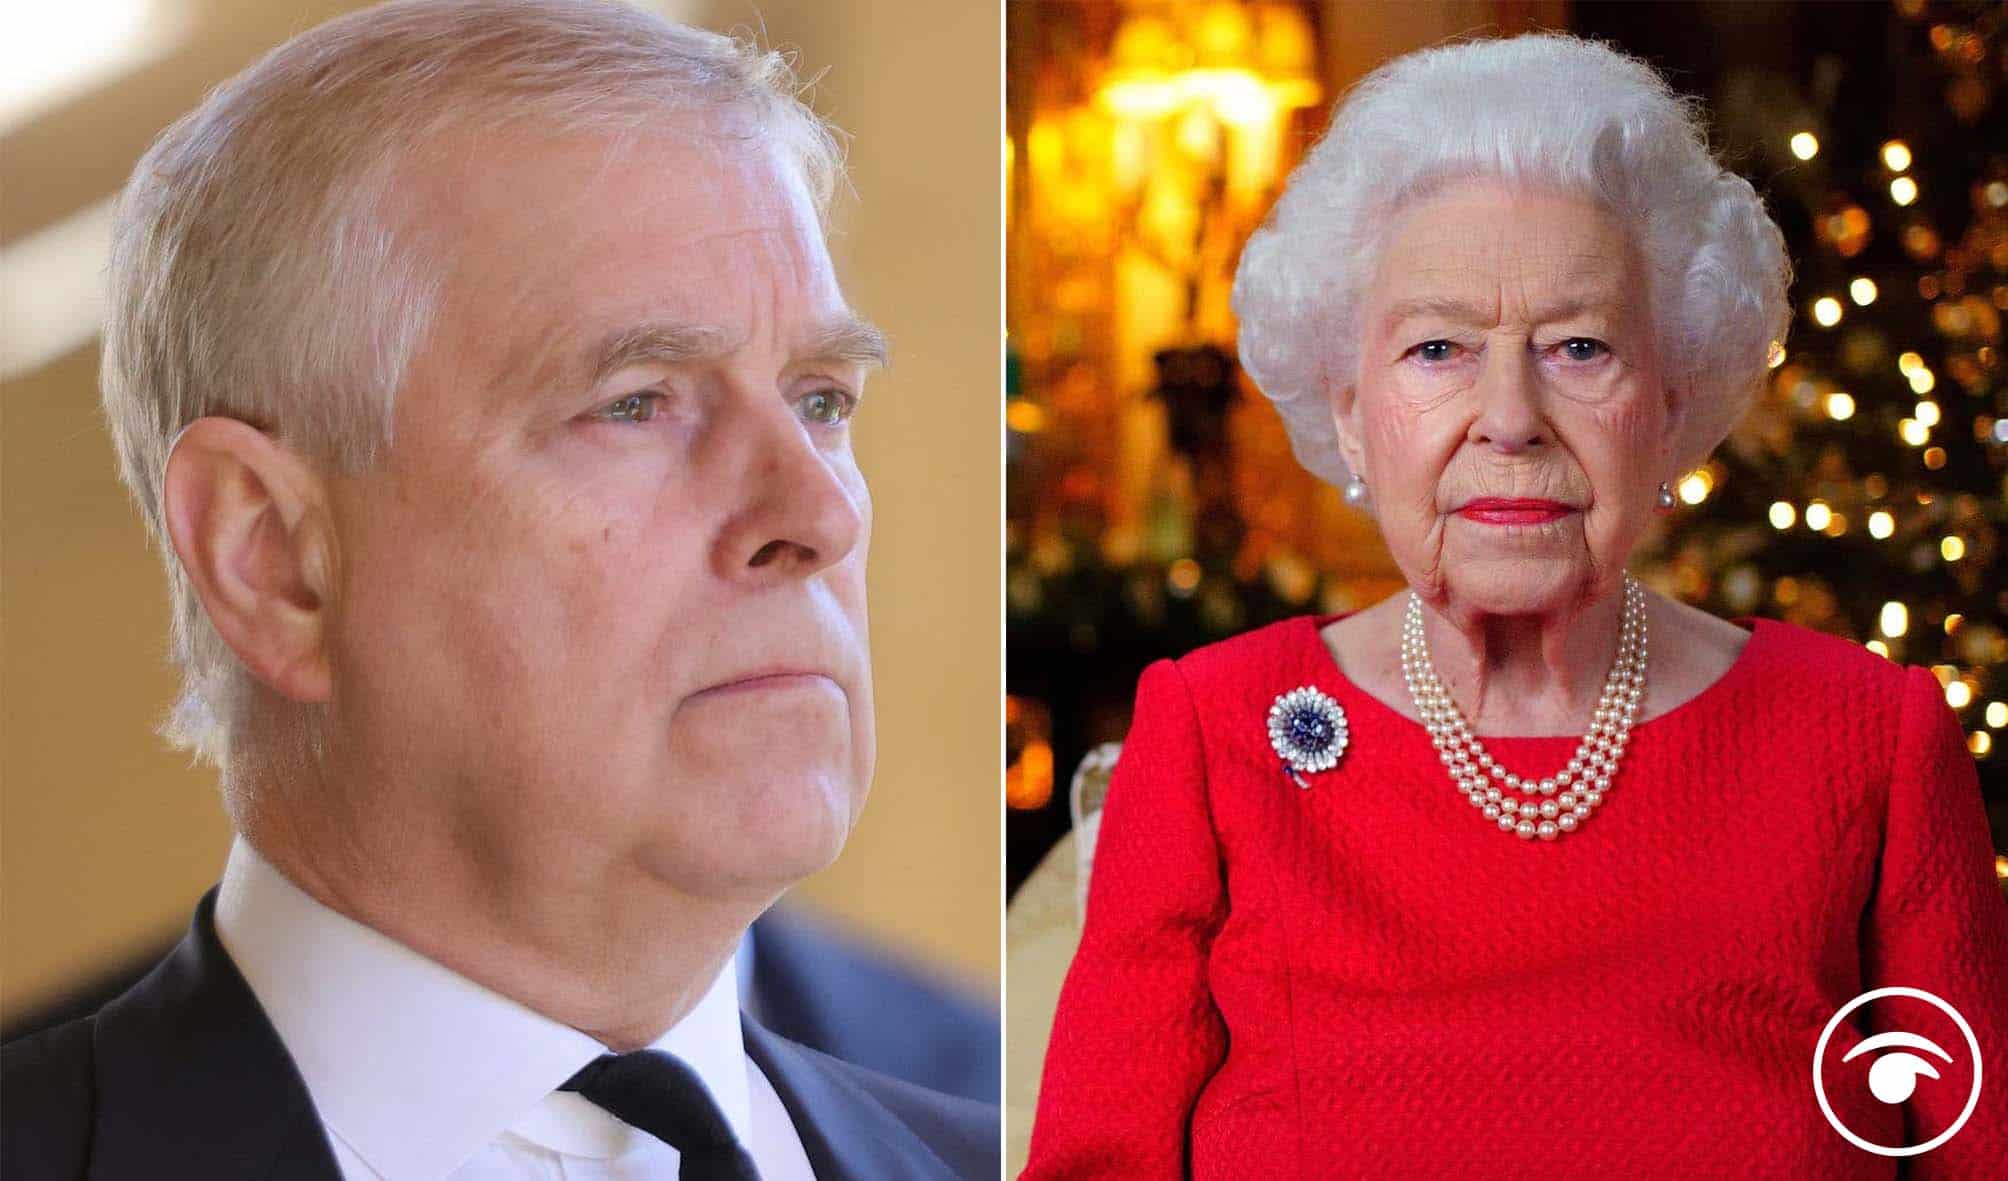 Andrew loses another patronage as palace fear his new legal demands could bury monarchy